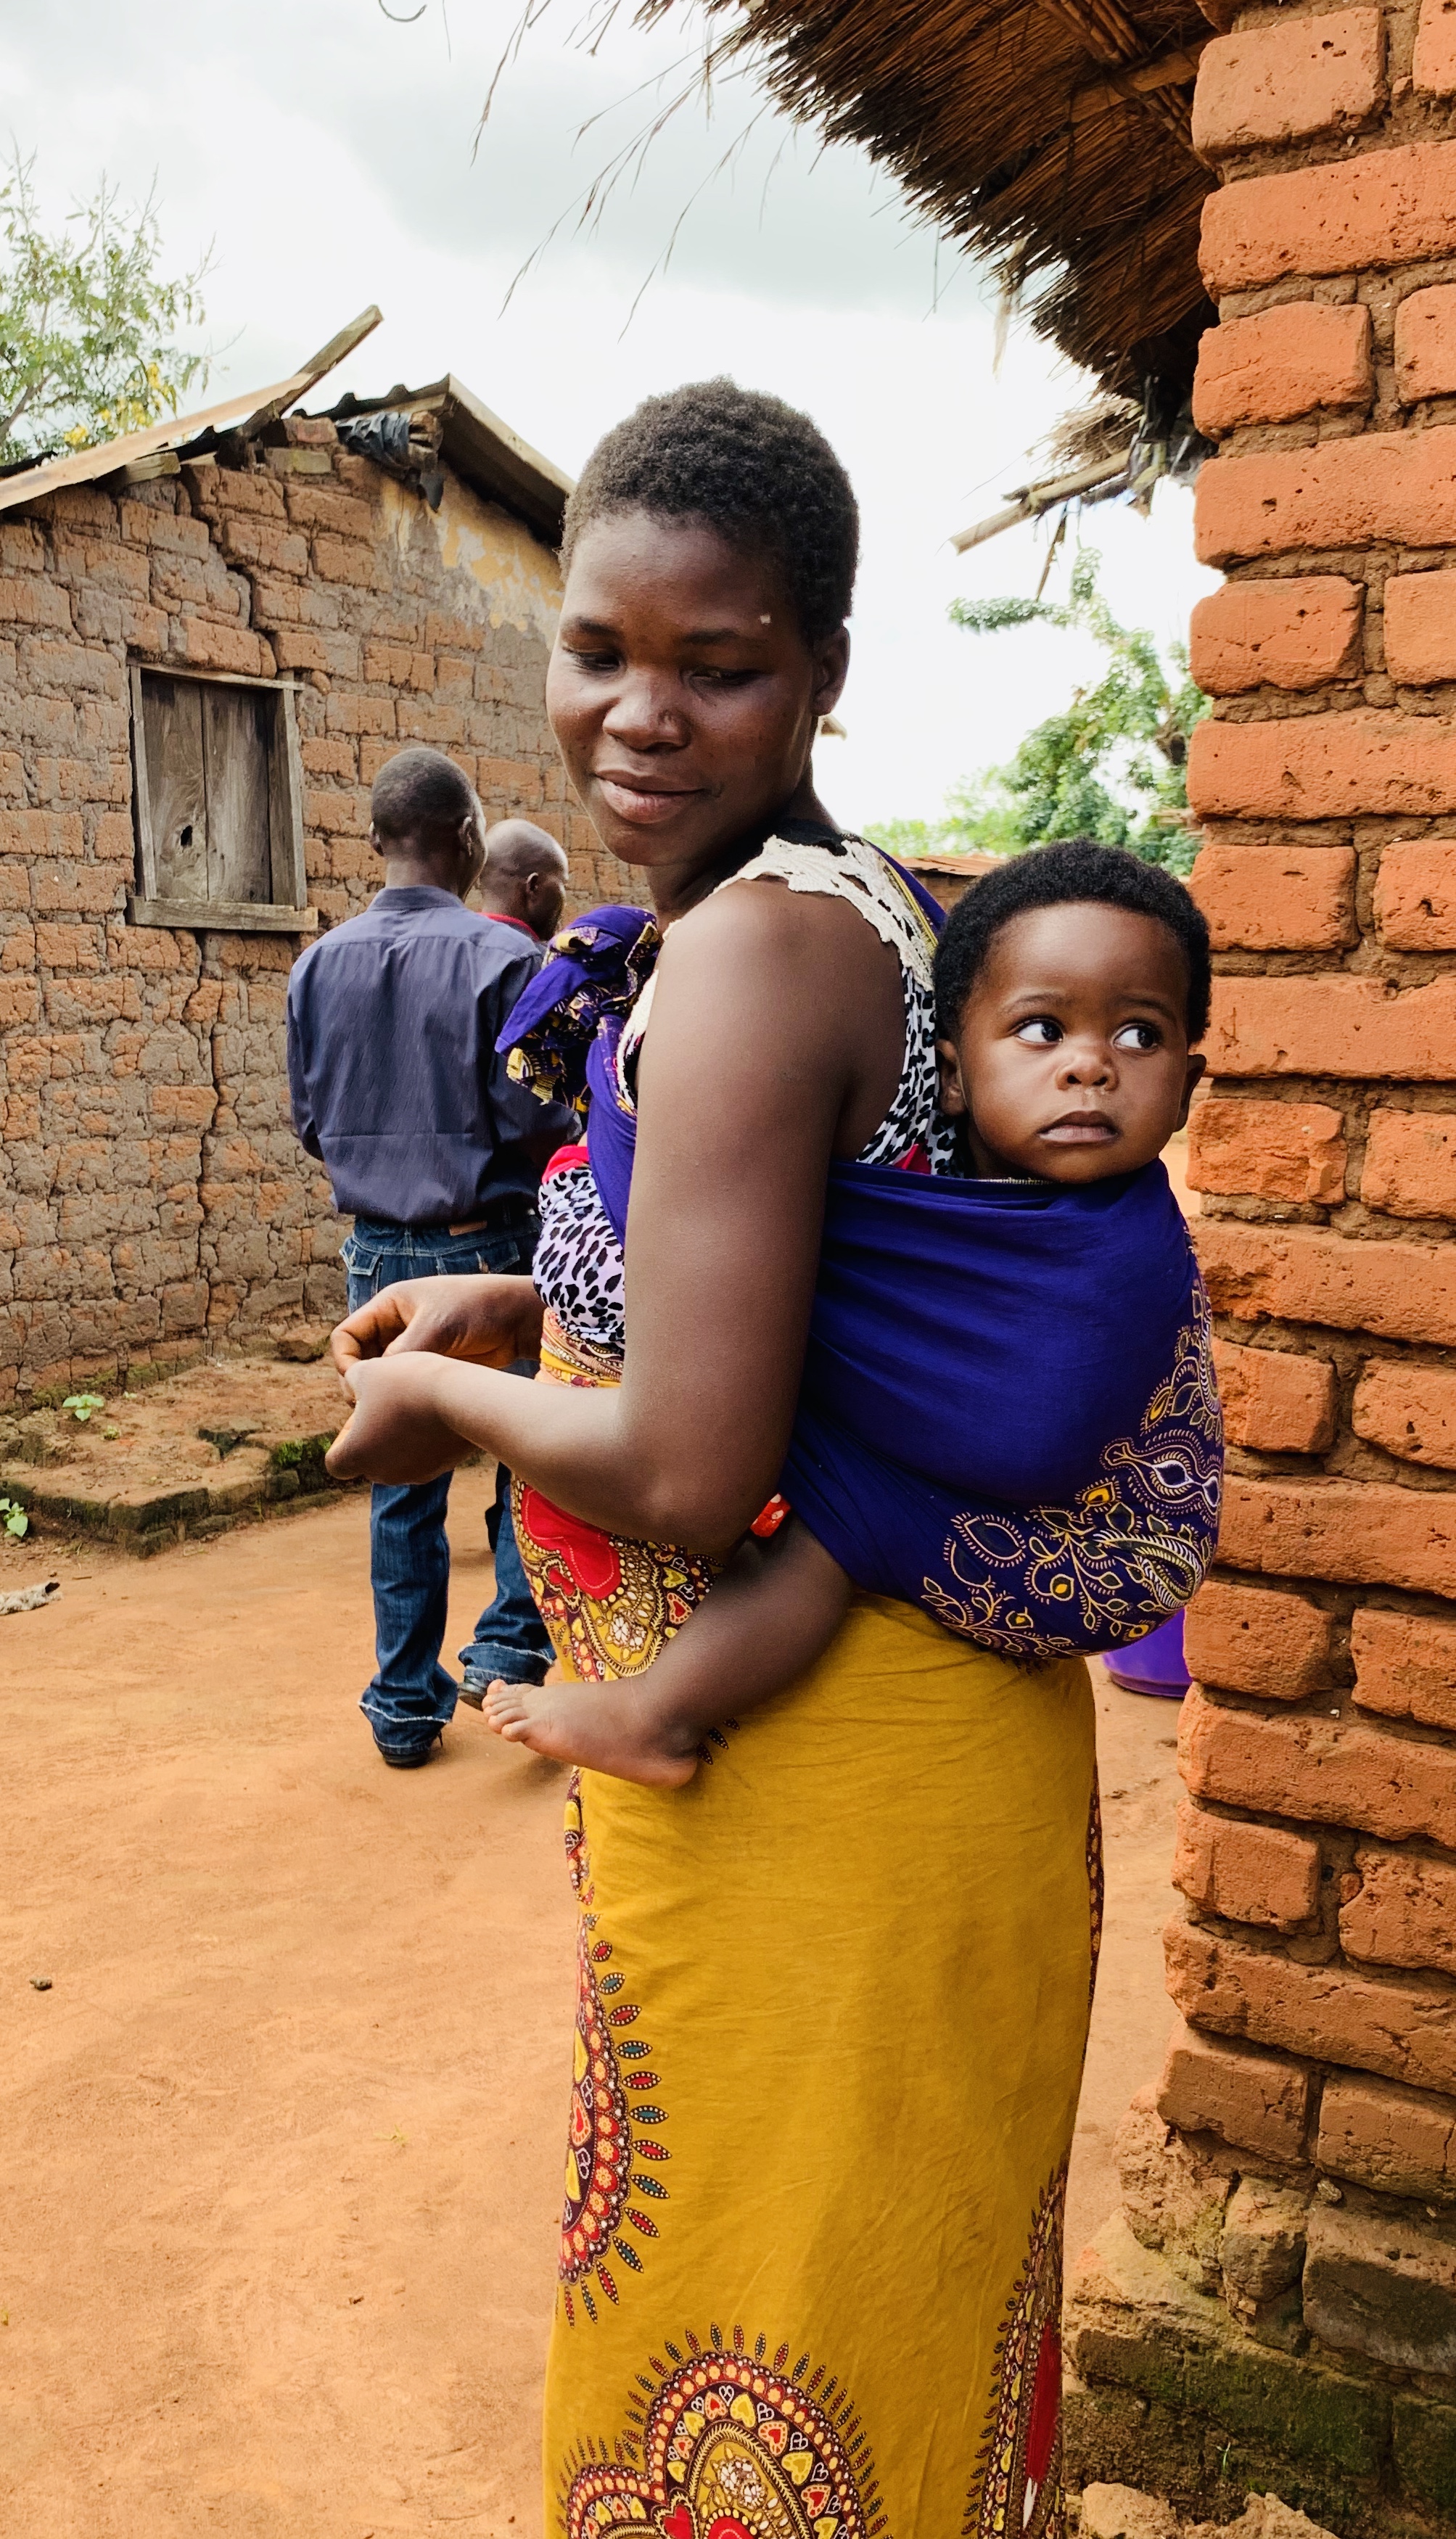 Malawian mother carrying baby in chitenge fabric. (Photo by Cheryl Barnes)